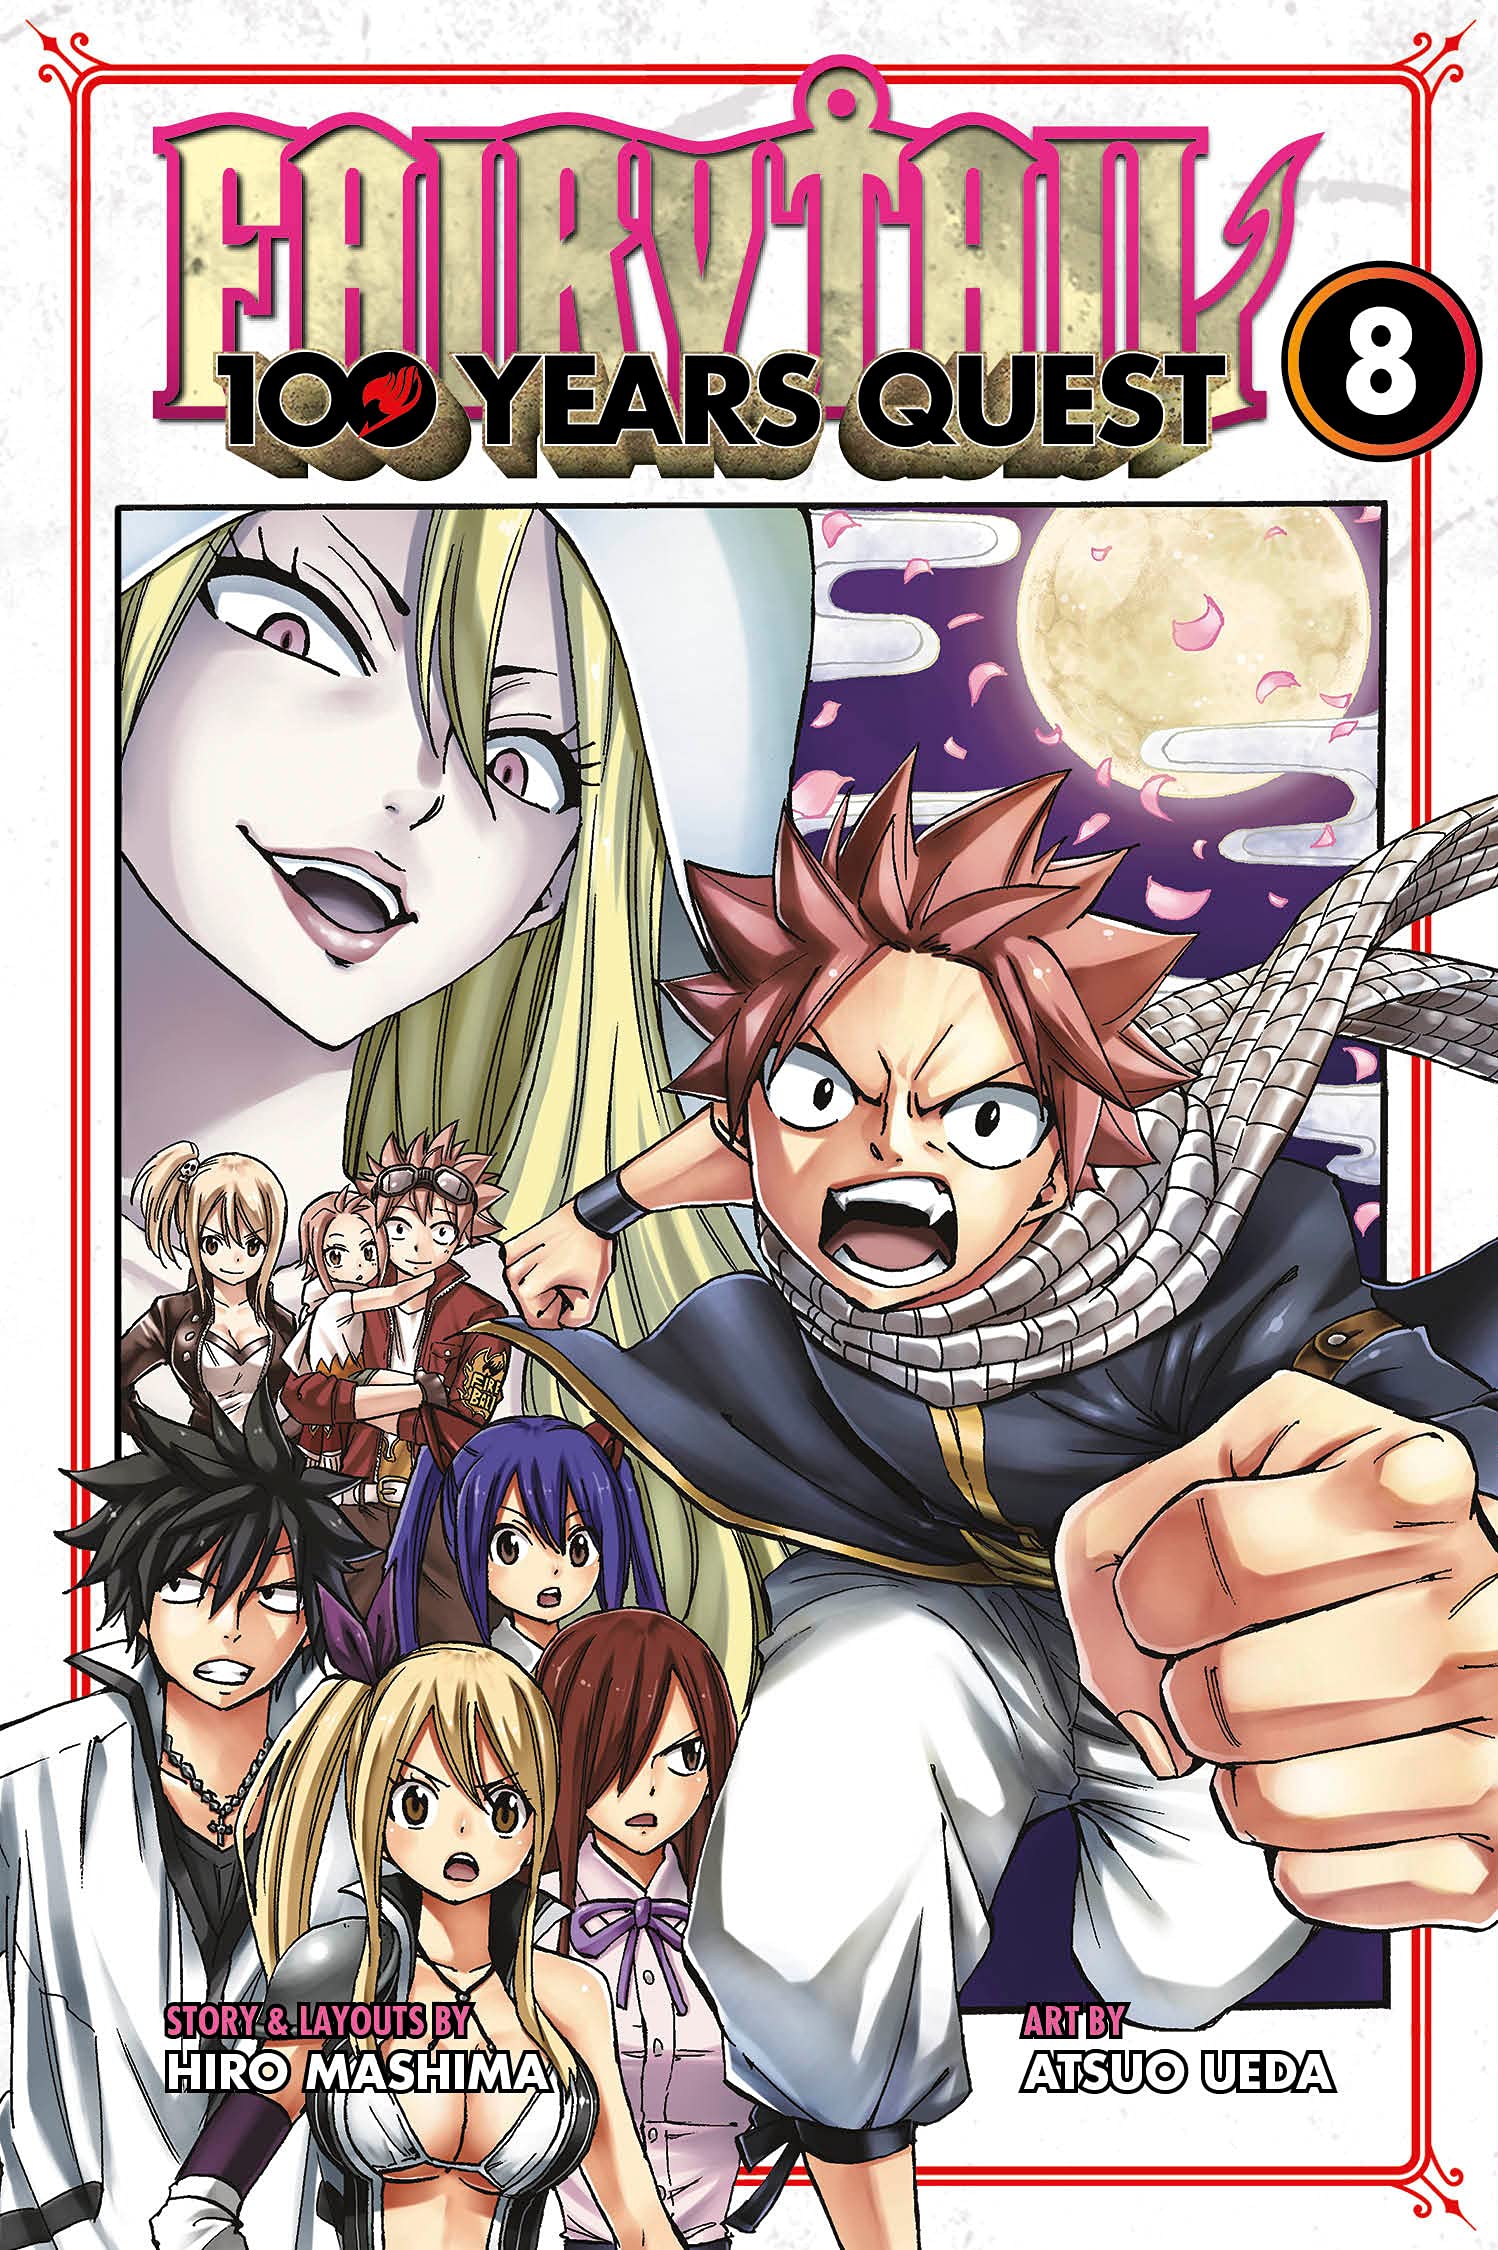 Fairy Tail 100 Years Quest Volume 8 From Fairy Tail By Hiro Mashima Published By Kodansha Comics Forbiddenplanet Com Uk And Worldwide Cult Entertainment Megastore